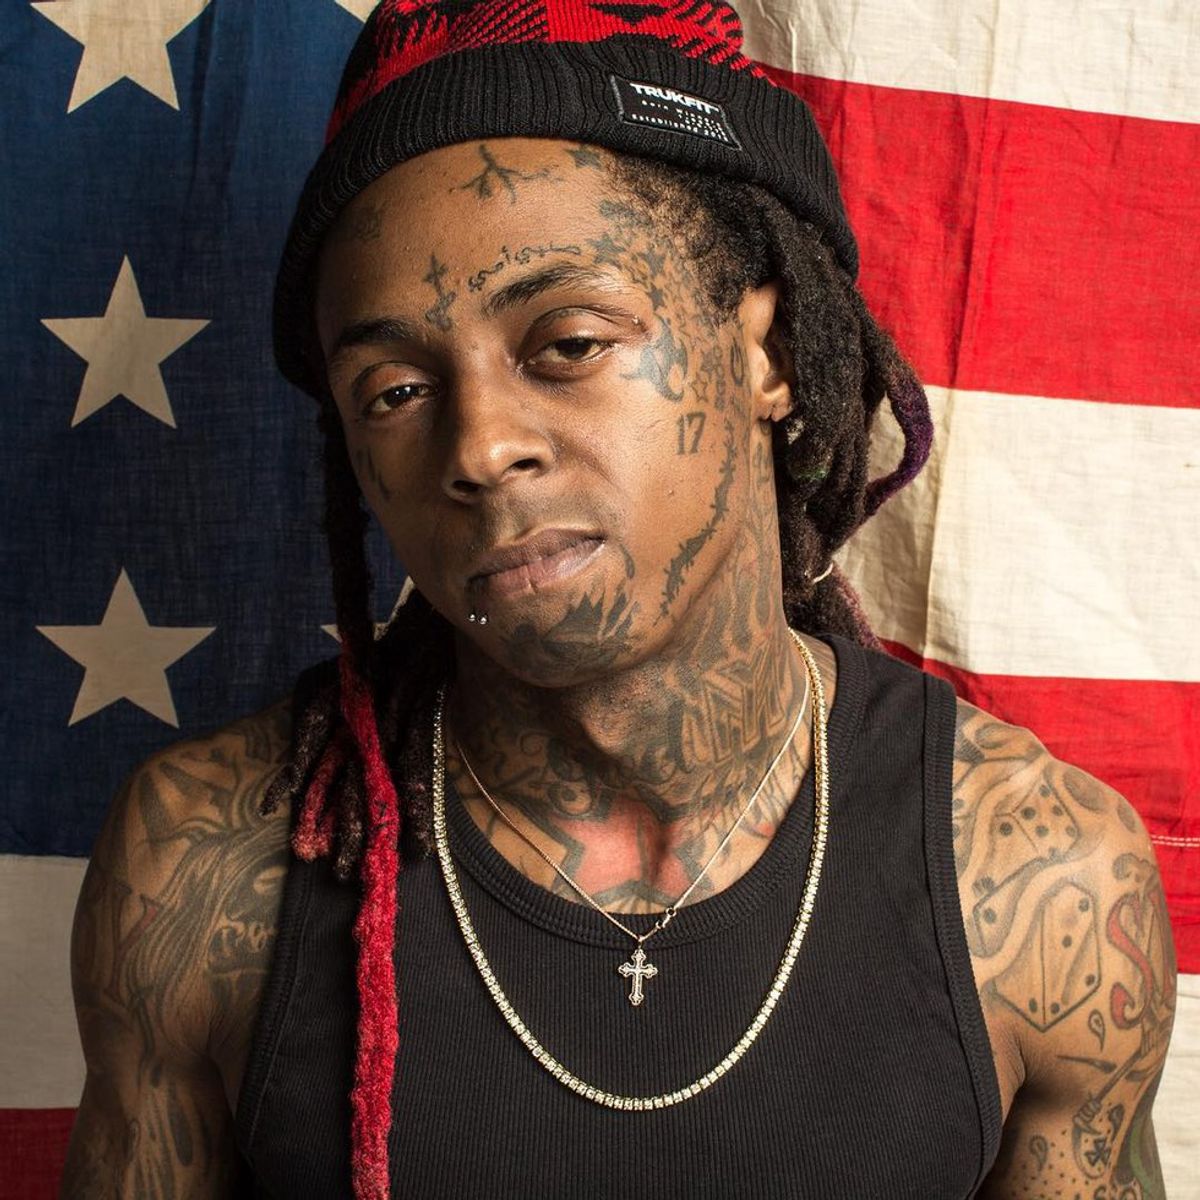 The Controversial Lil Wayne Video You Haven't Seen